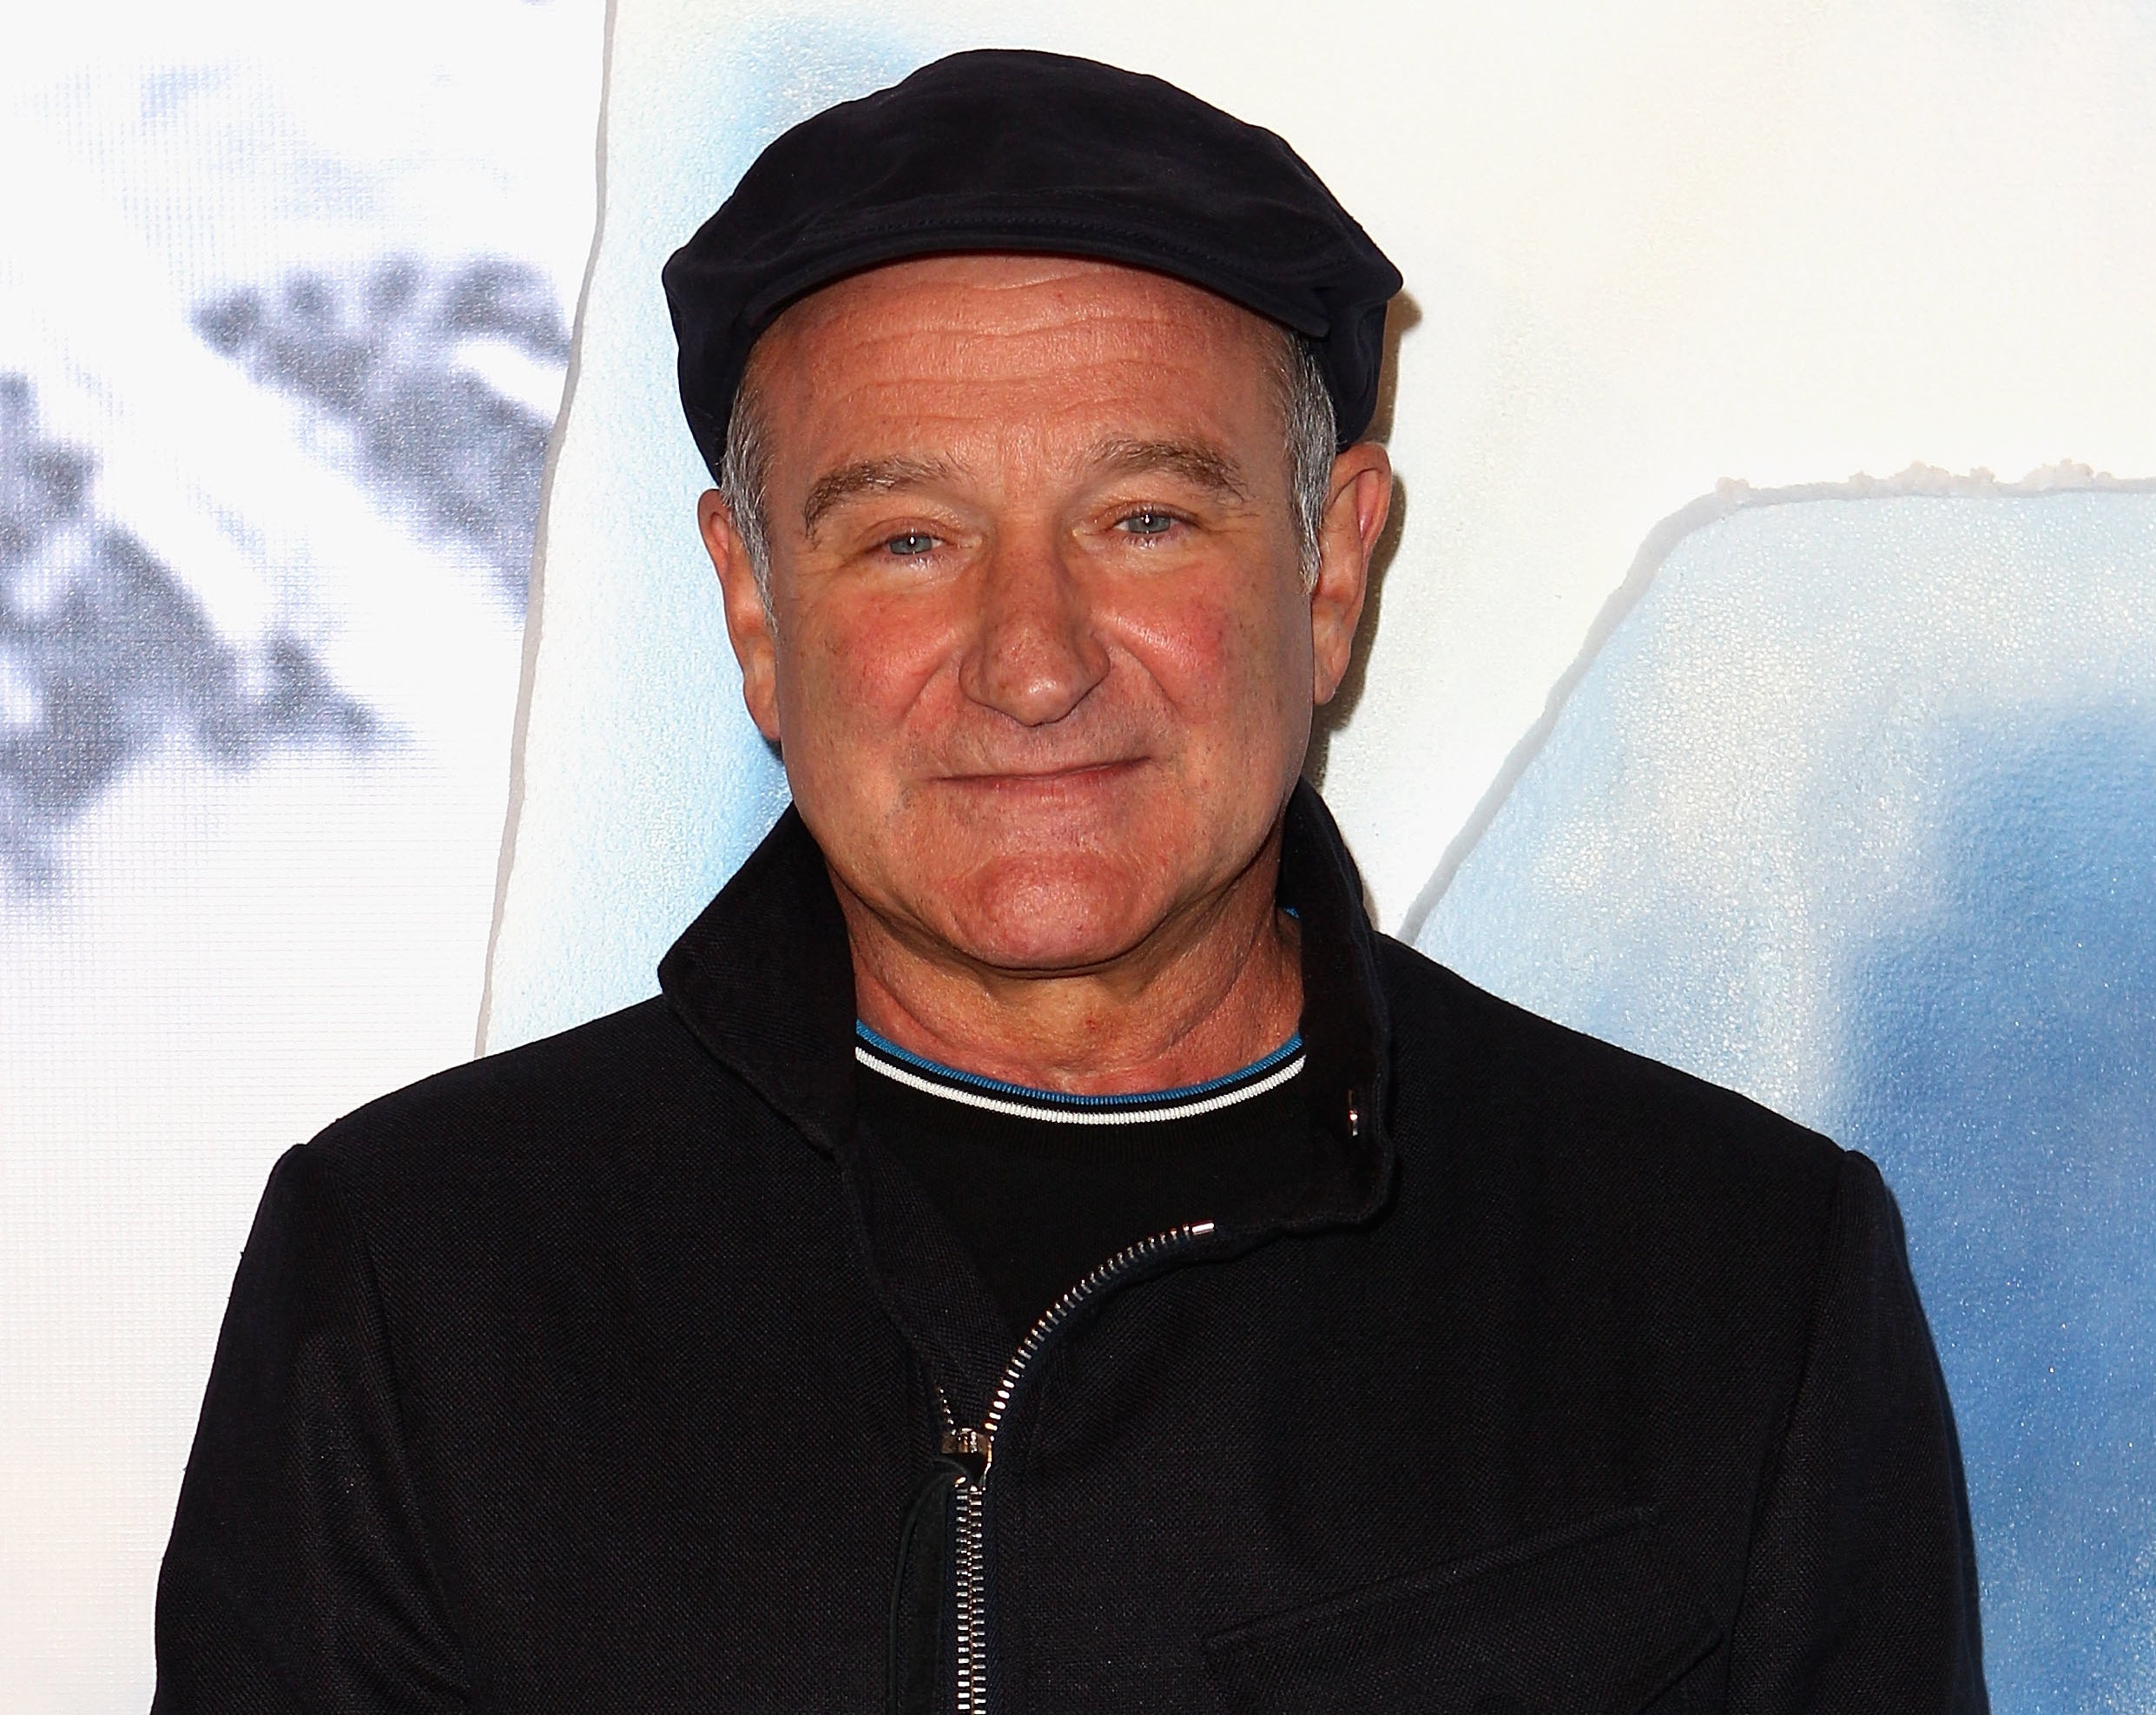 Robin smiles while wearing a newspaper cap and jacket to an event